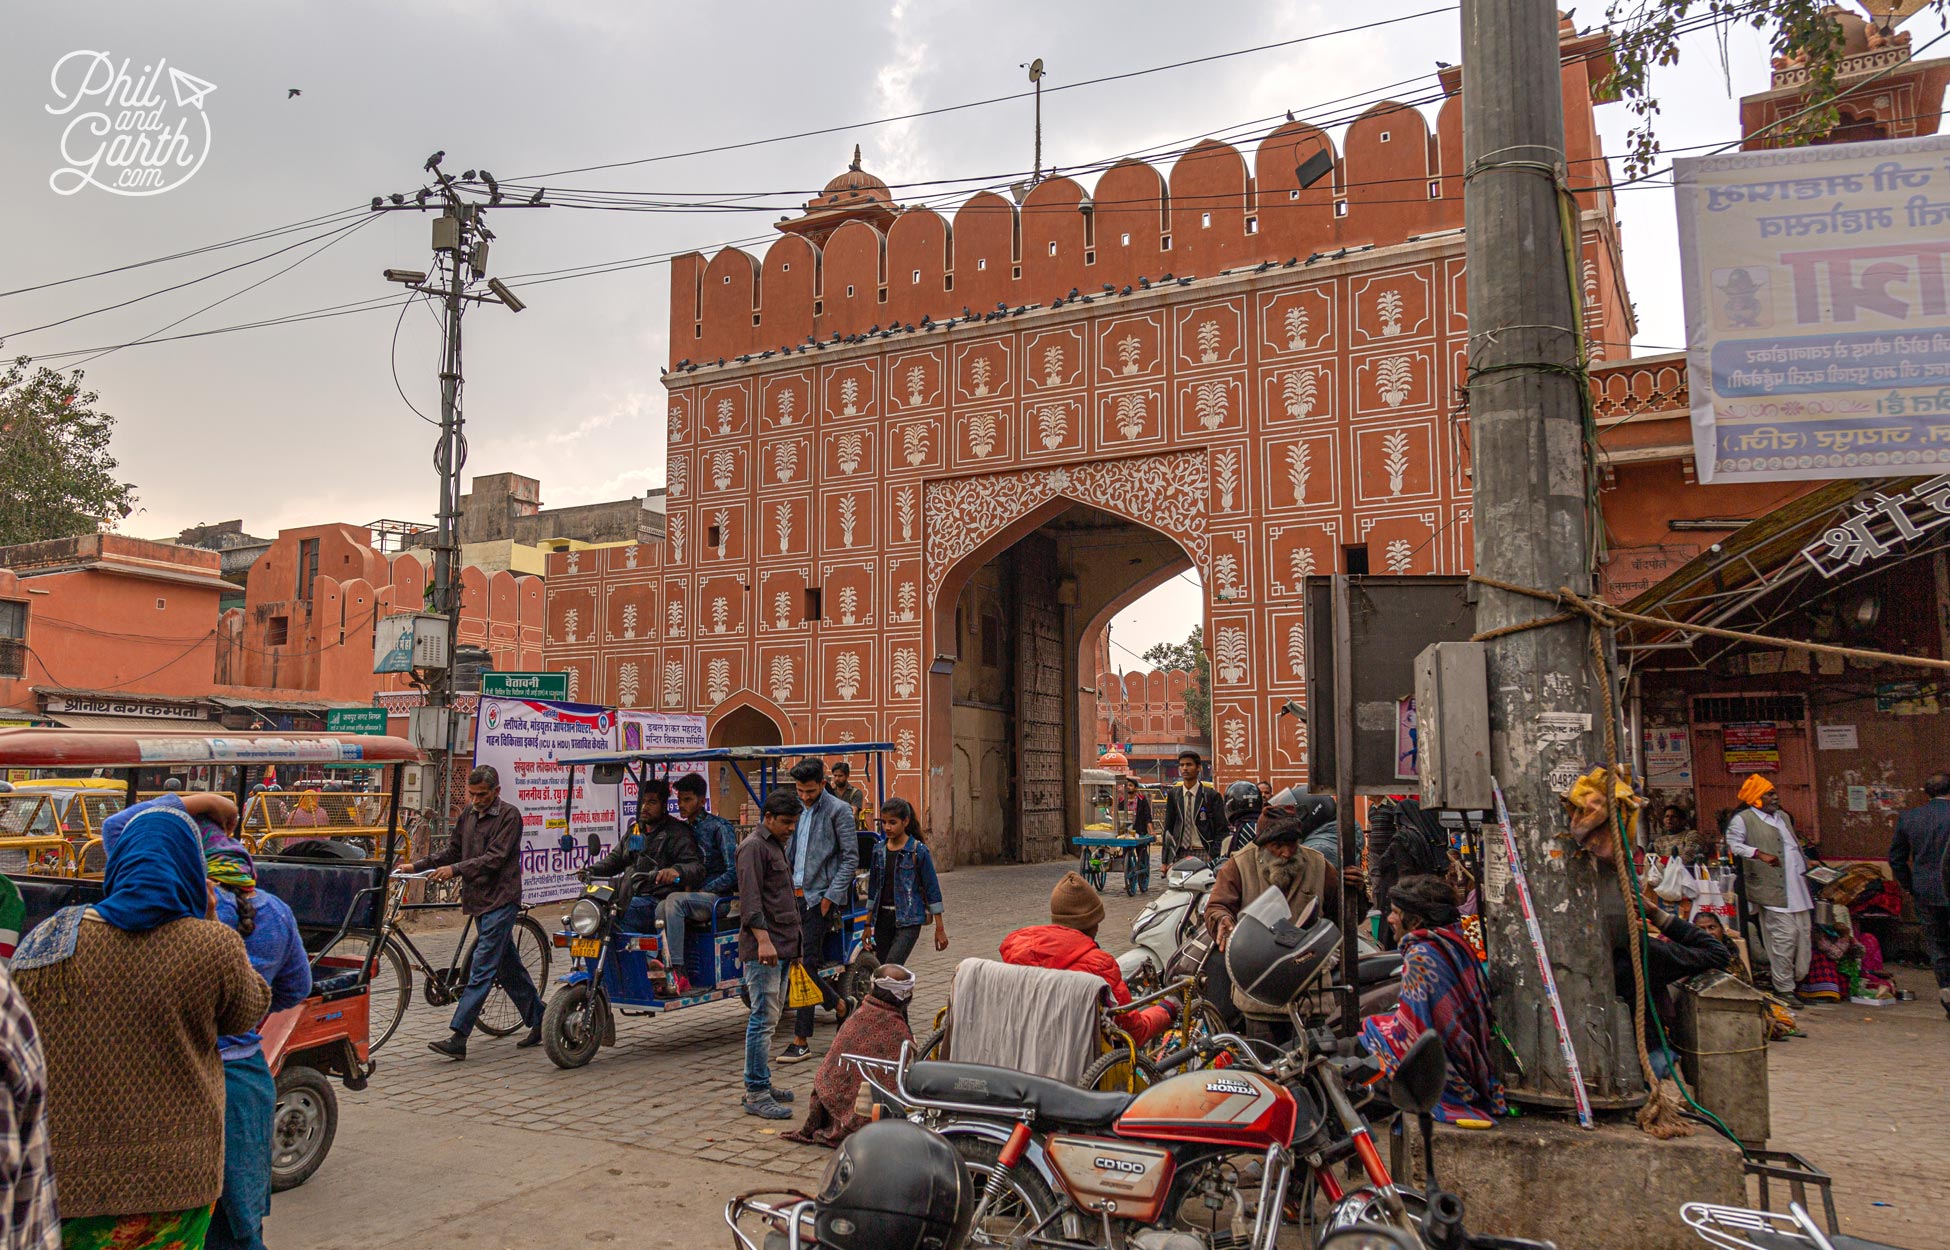 The Chand Pol gate is one of the 7 grand entrance gates into Jaipur's old walled city